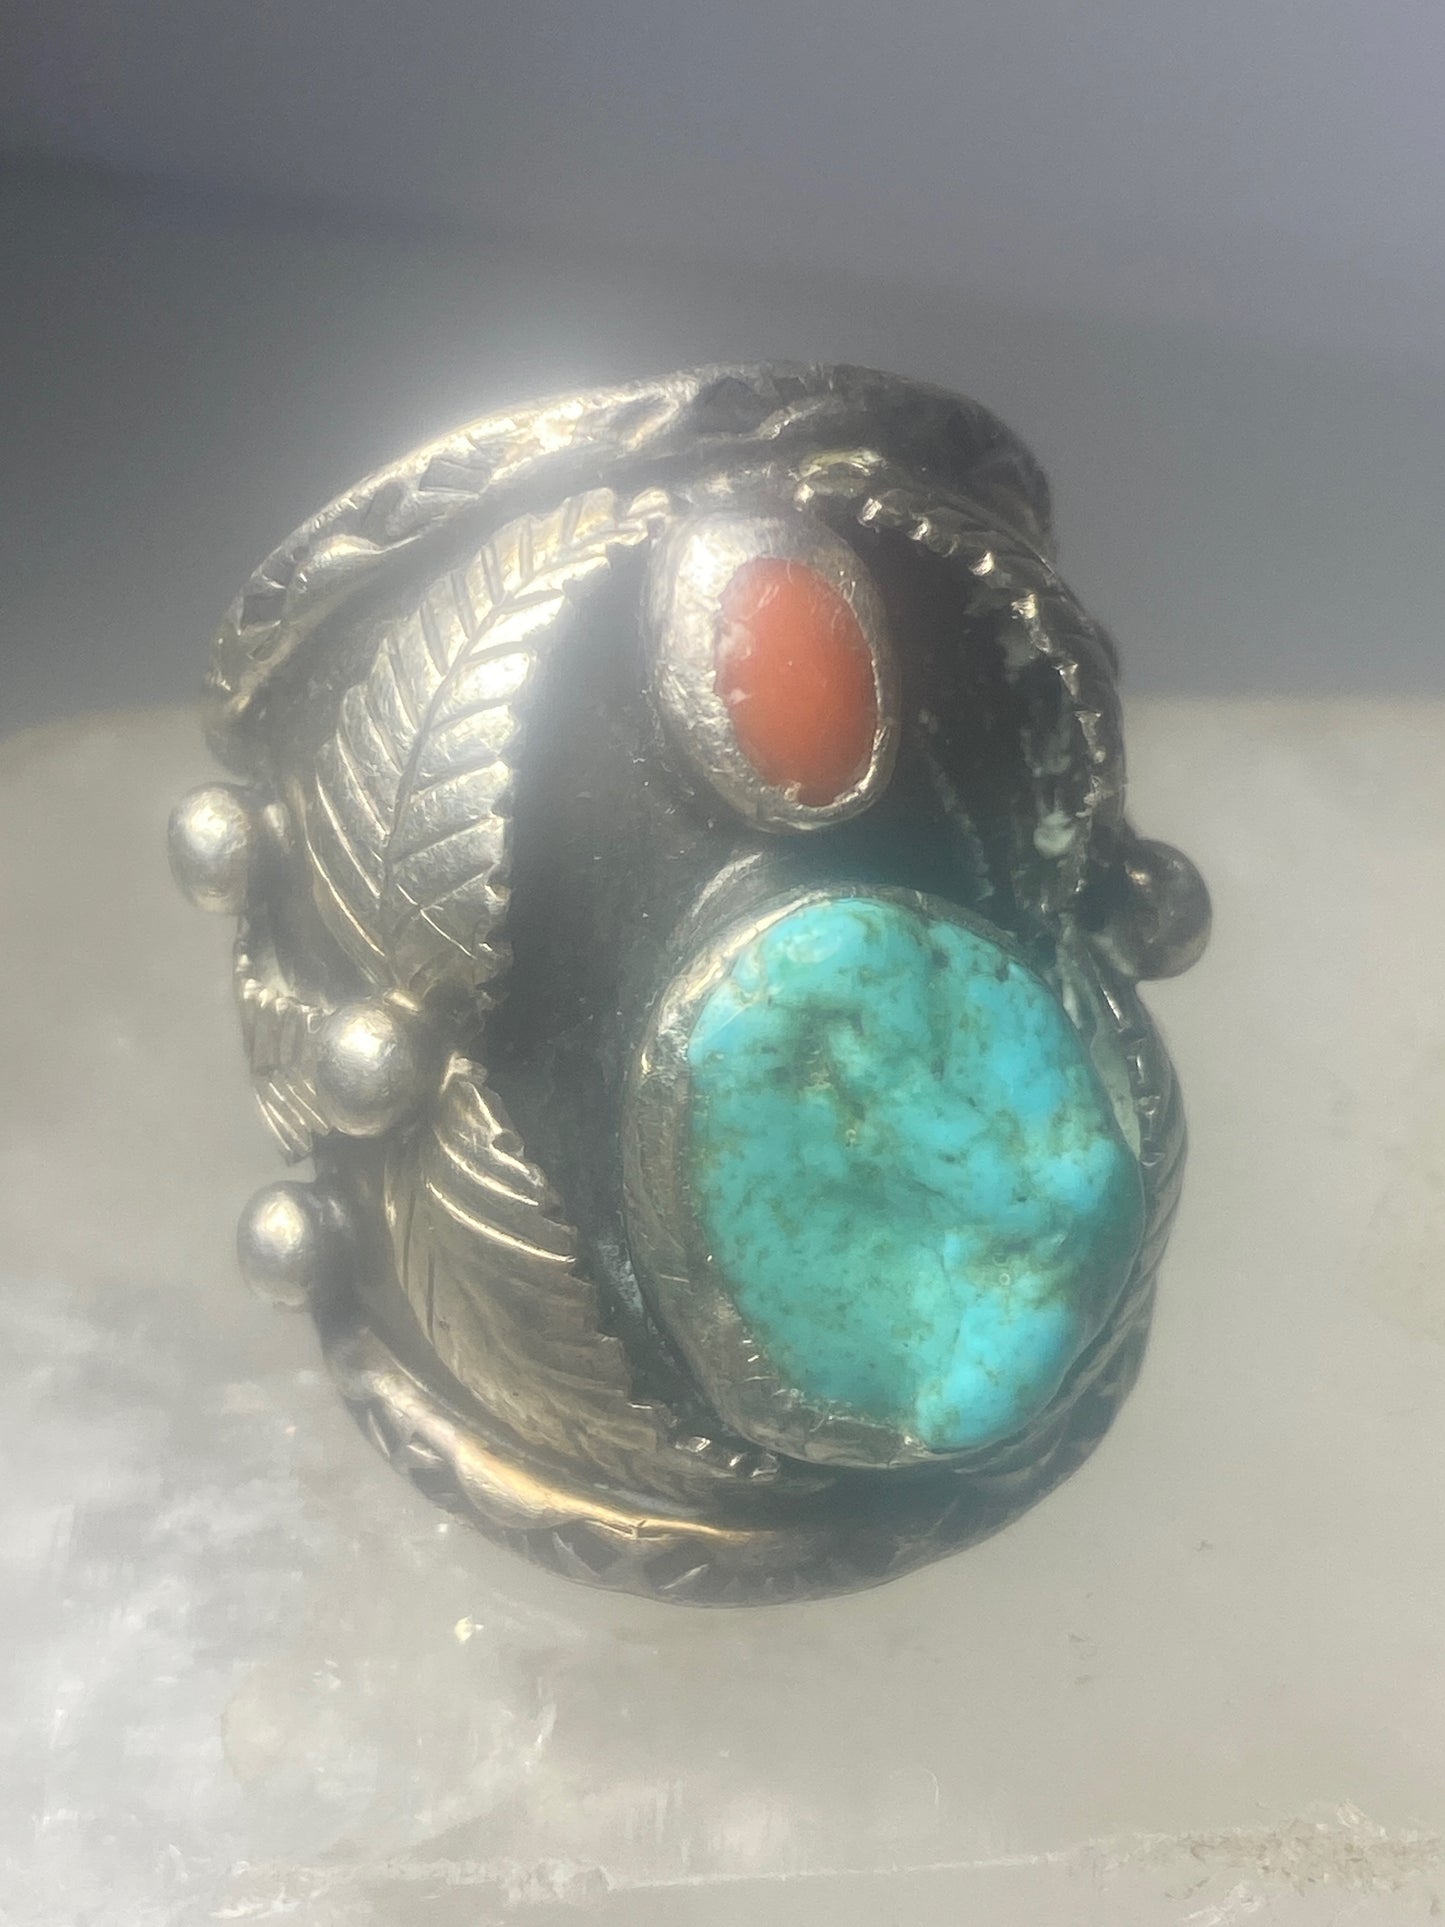 Turquoise coral Ring Navajo sterling silver women men